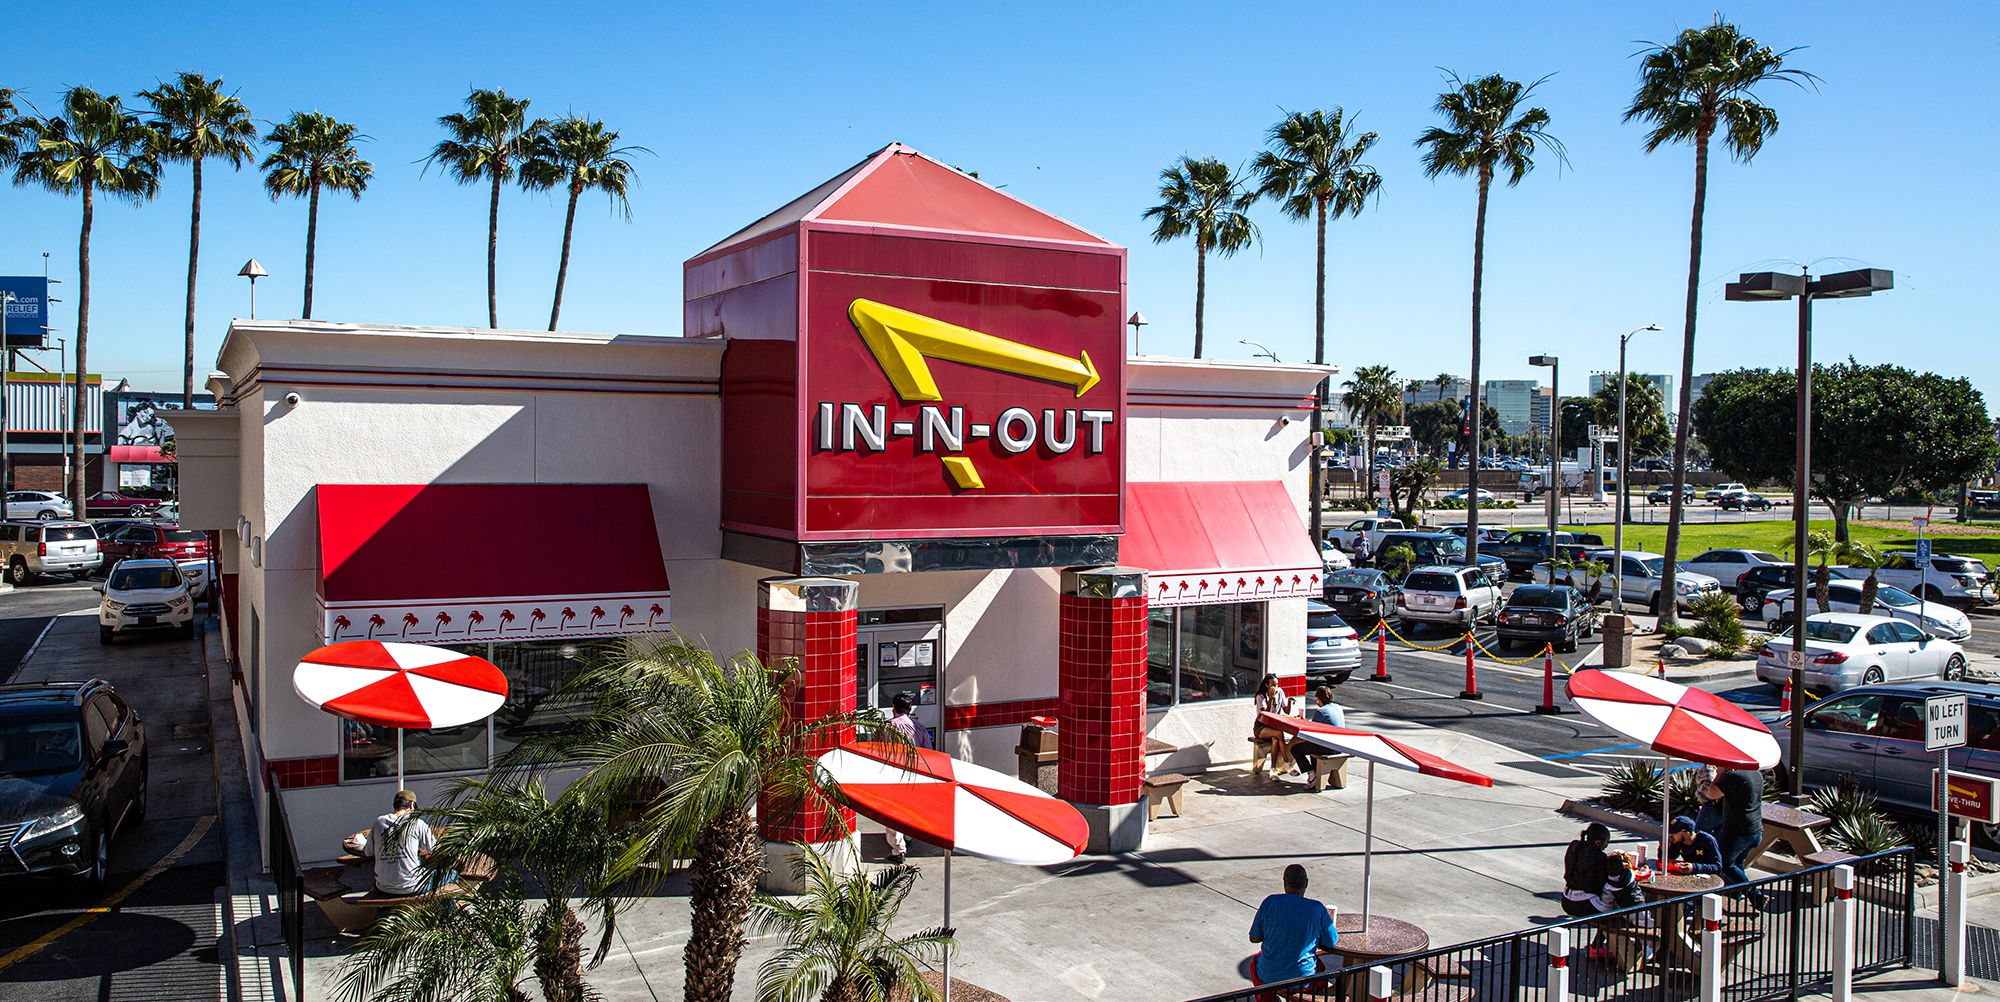 In-N-Out Is Hosting a Car Show and Drag Races For Its 75th Anniversary